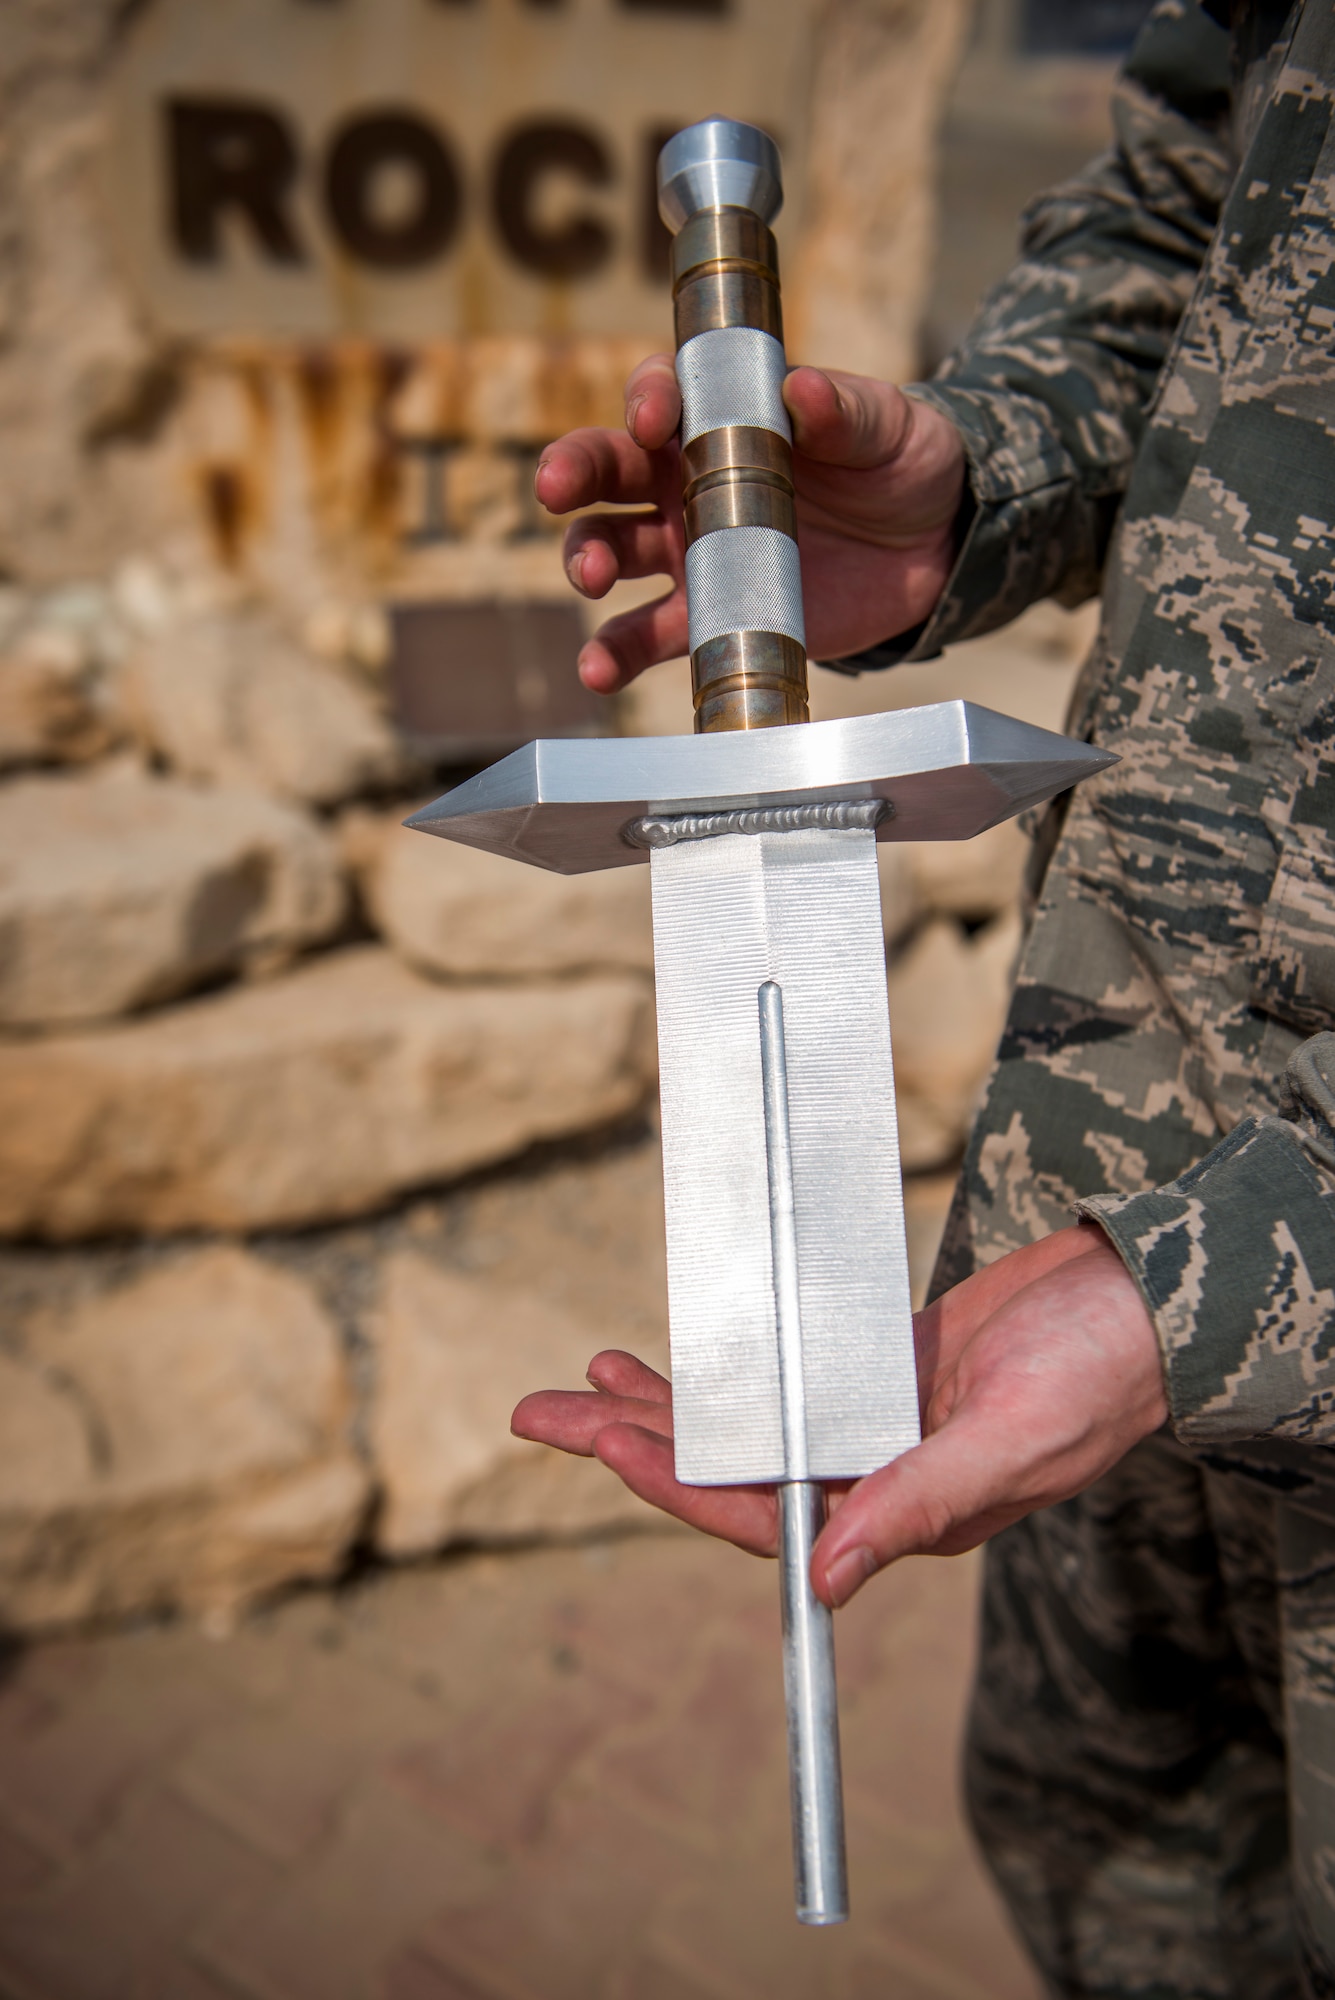 U.S. Air Force Staff Sgt. Justin Costanzo, 386th Expeditionary Maintenance Squadron aircraft maintenance technician, shows off the sword before placing it in The Rock Aug. 19, 2014 at an undisclosed location in Southwest Asia. Costanzo, along with Staff Sgt. Jarrod McMillian, spent over 140 man-hours designing and building the sword. Costanzo deployed from Shaw Air Force Base, S.C. in support of Operation Enduring Freedom.  (U.S. Air Force photo by Staff Sgt. Jeremy Bowcock)